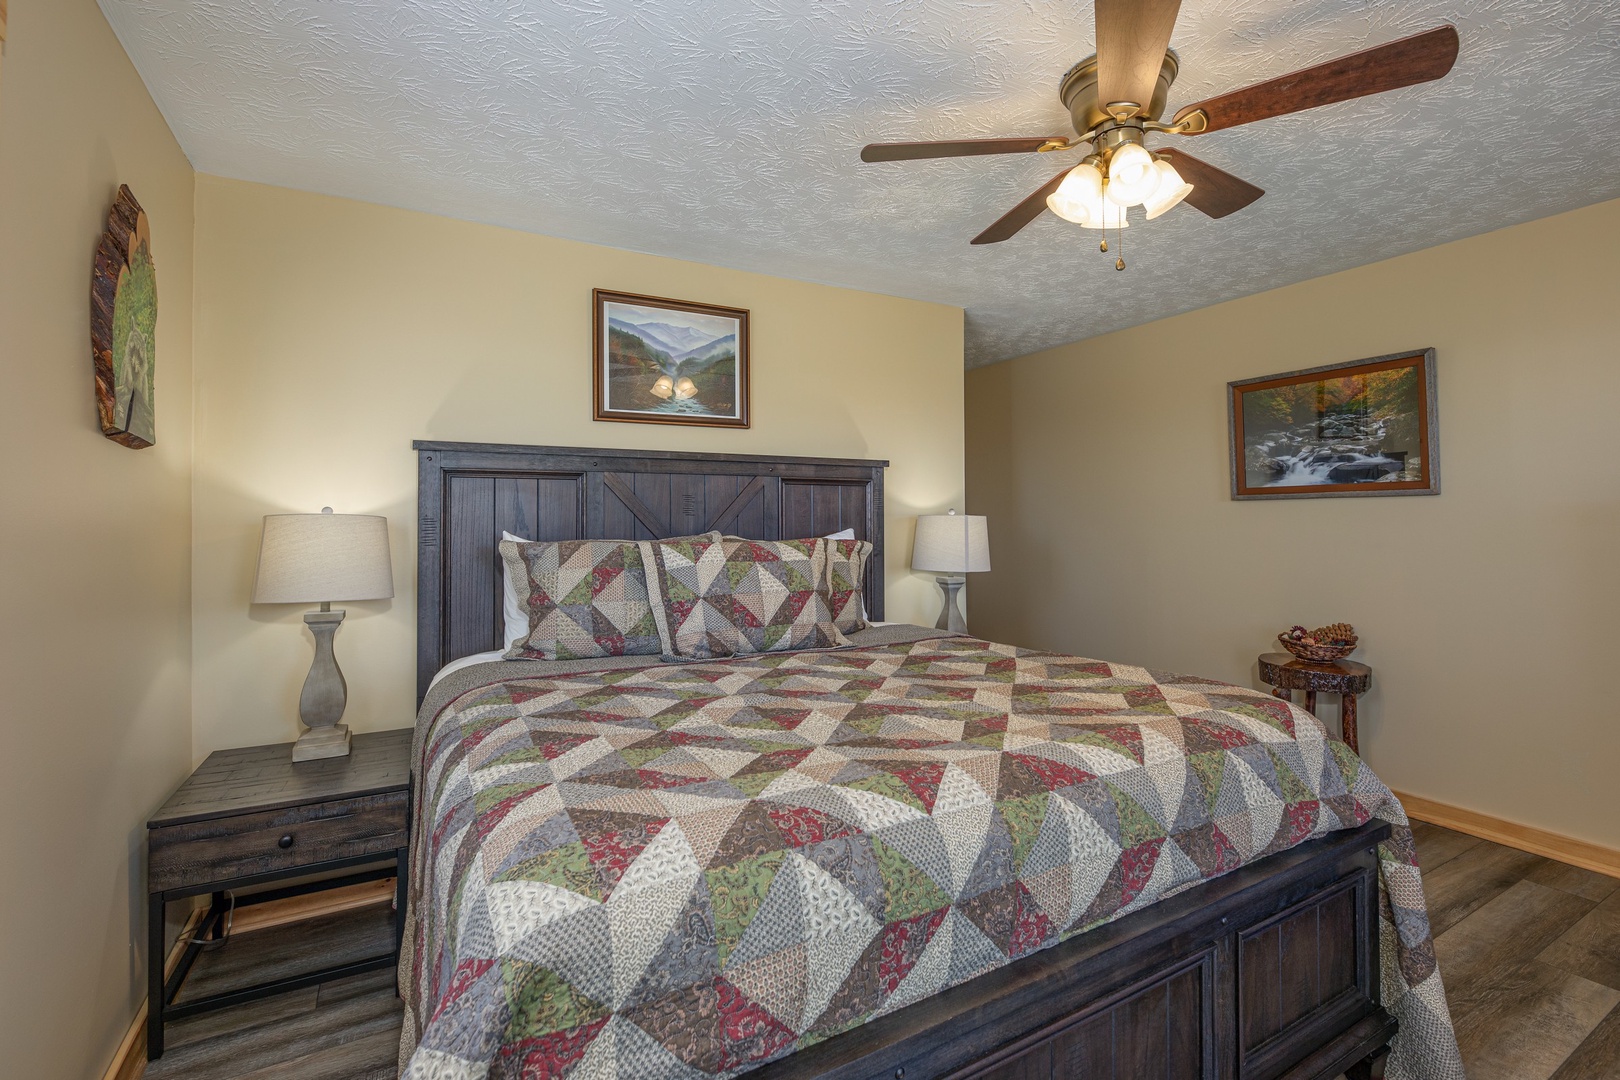 Bedroom with two night stands and lamps at Le Bear Chalet, a 7 bedroom cabin rental located in Gatlinburg